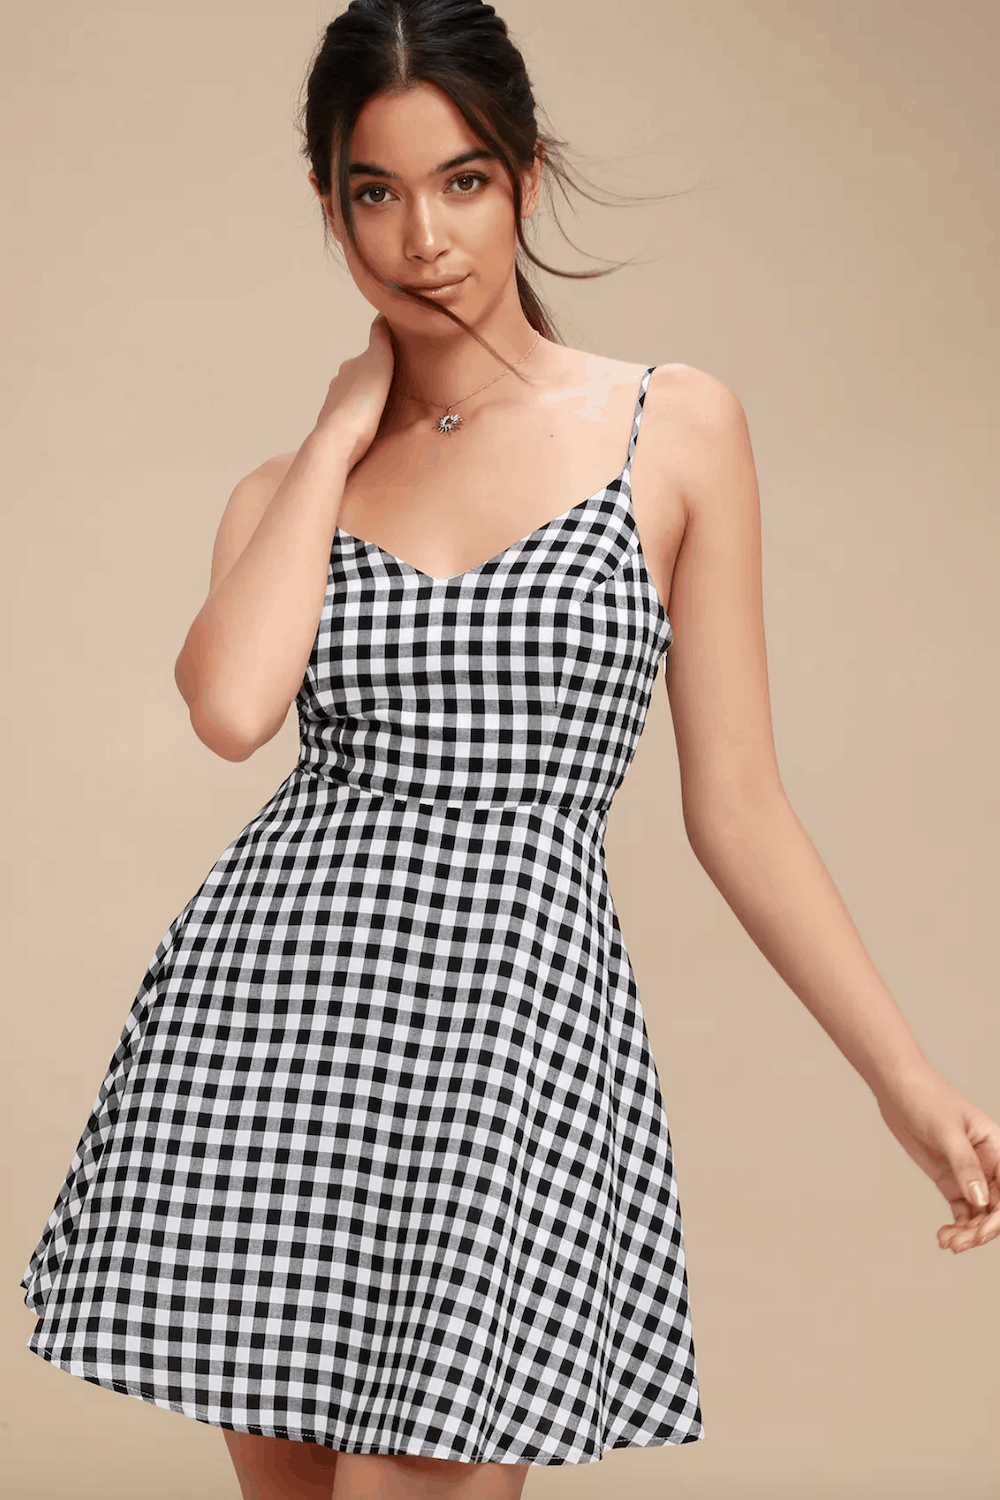 Positano Italy Outfits Cute Dresses Black and White Checkered Print Skater Dress